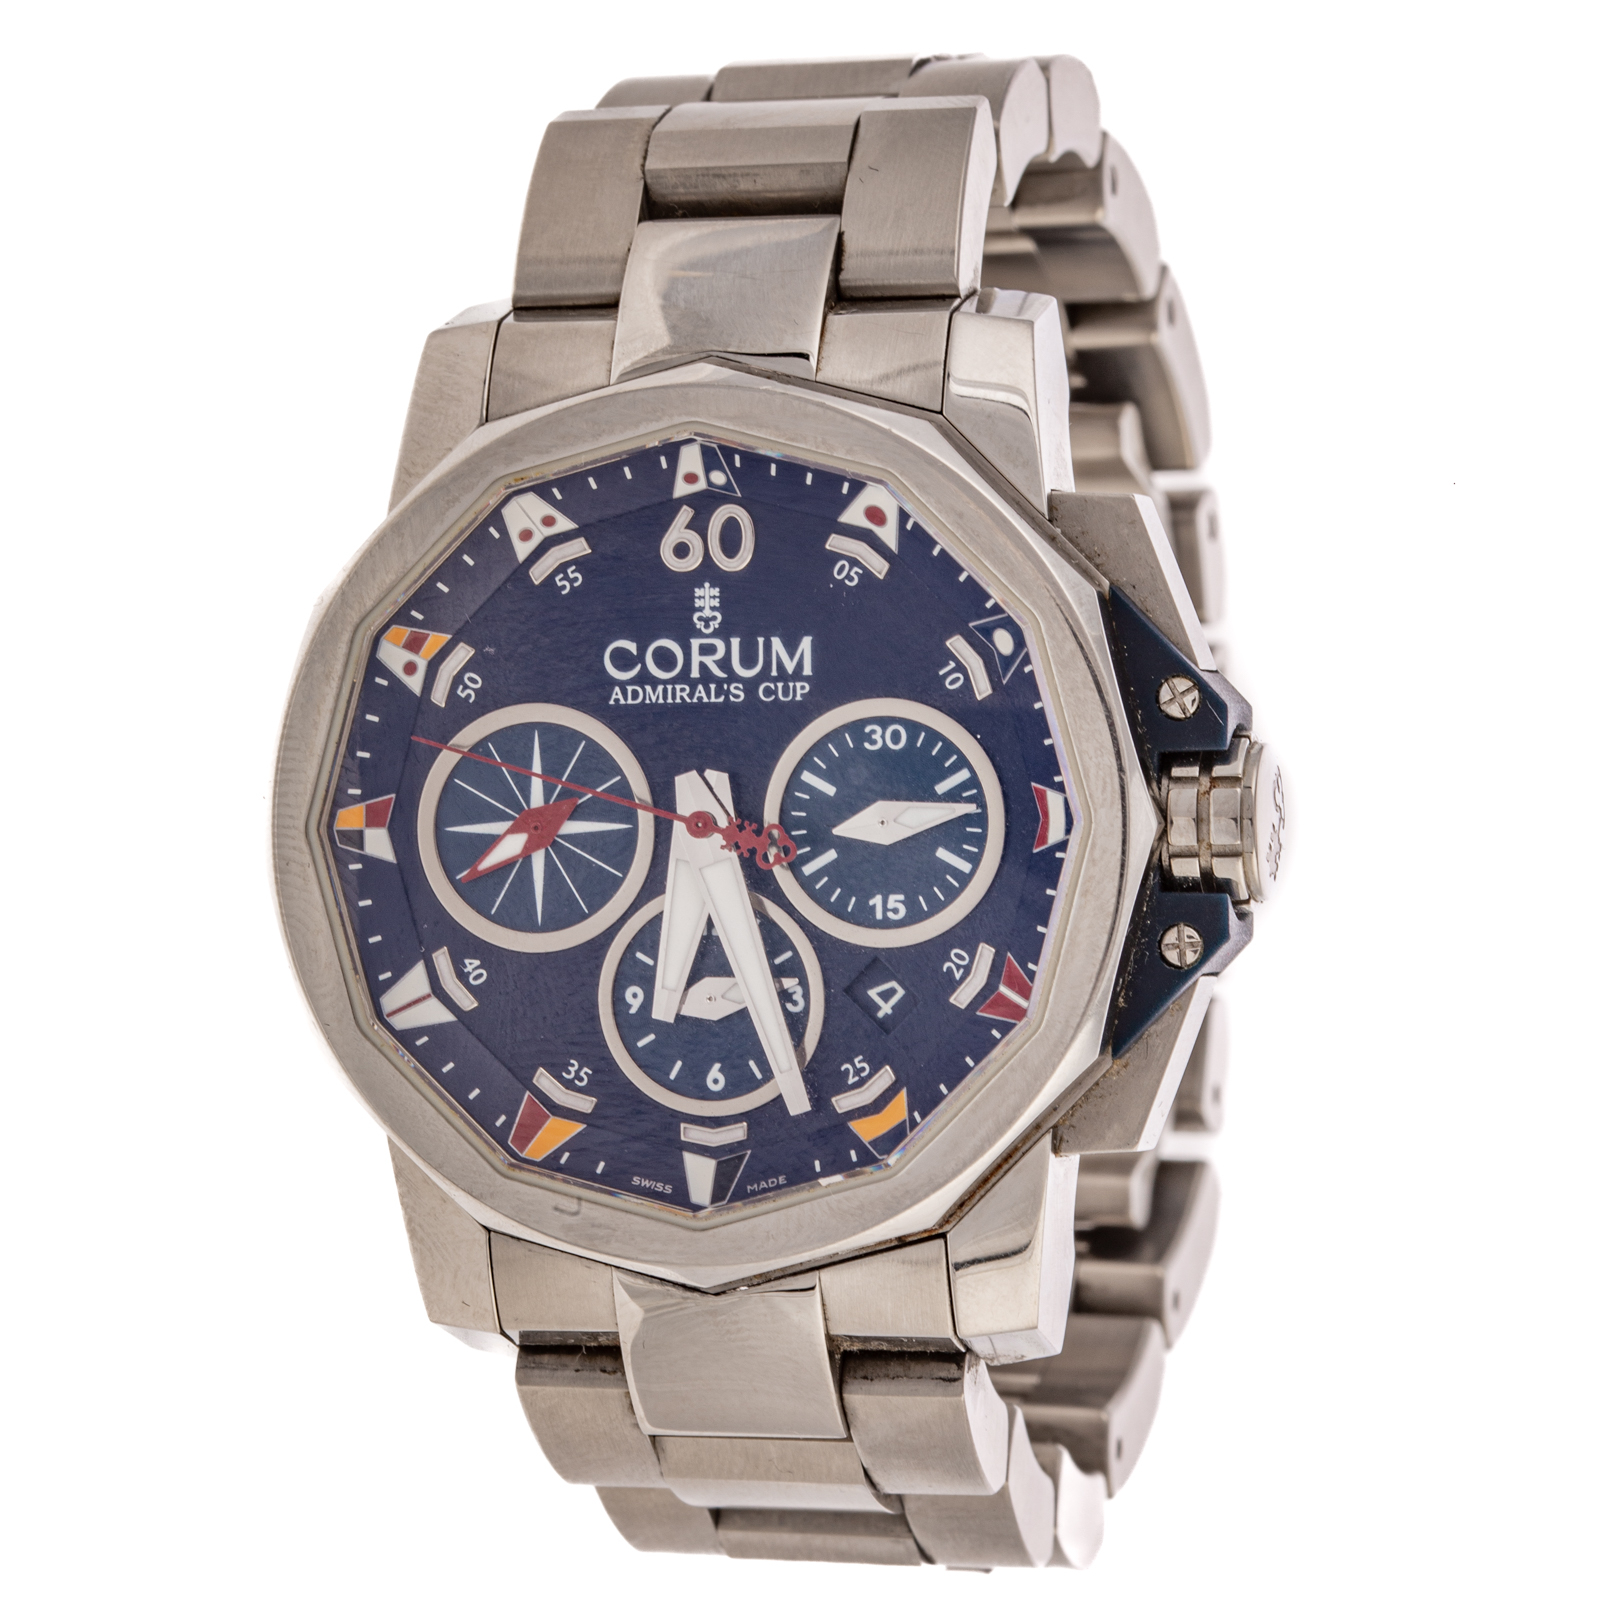 A CORUM ADMIRAL S CUP CHALLENGE 338687